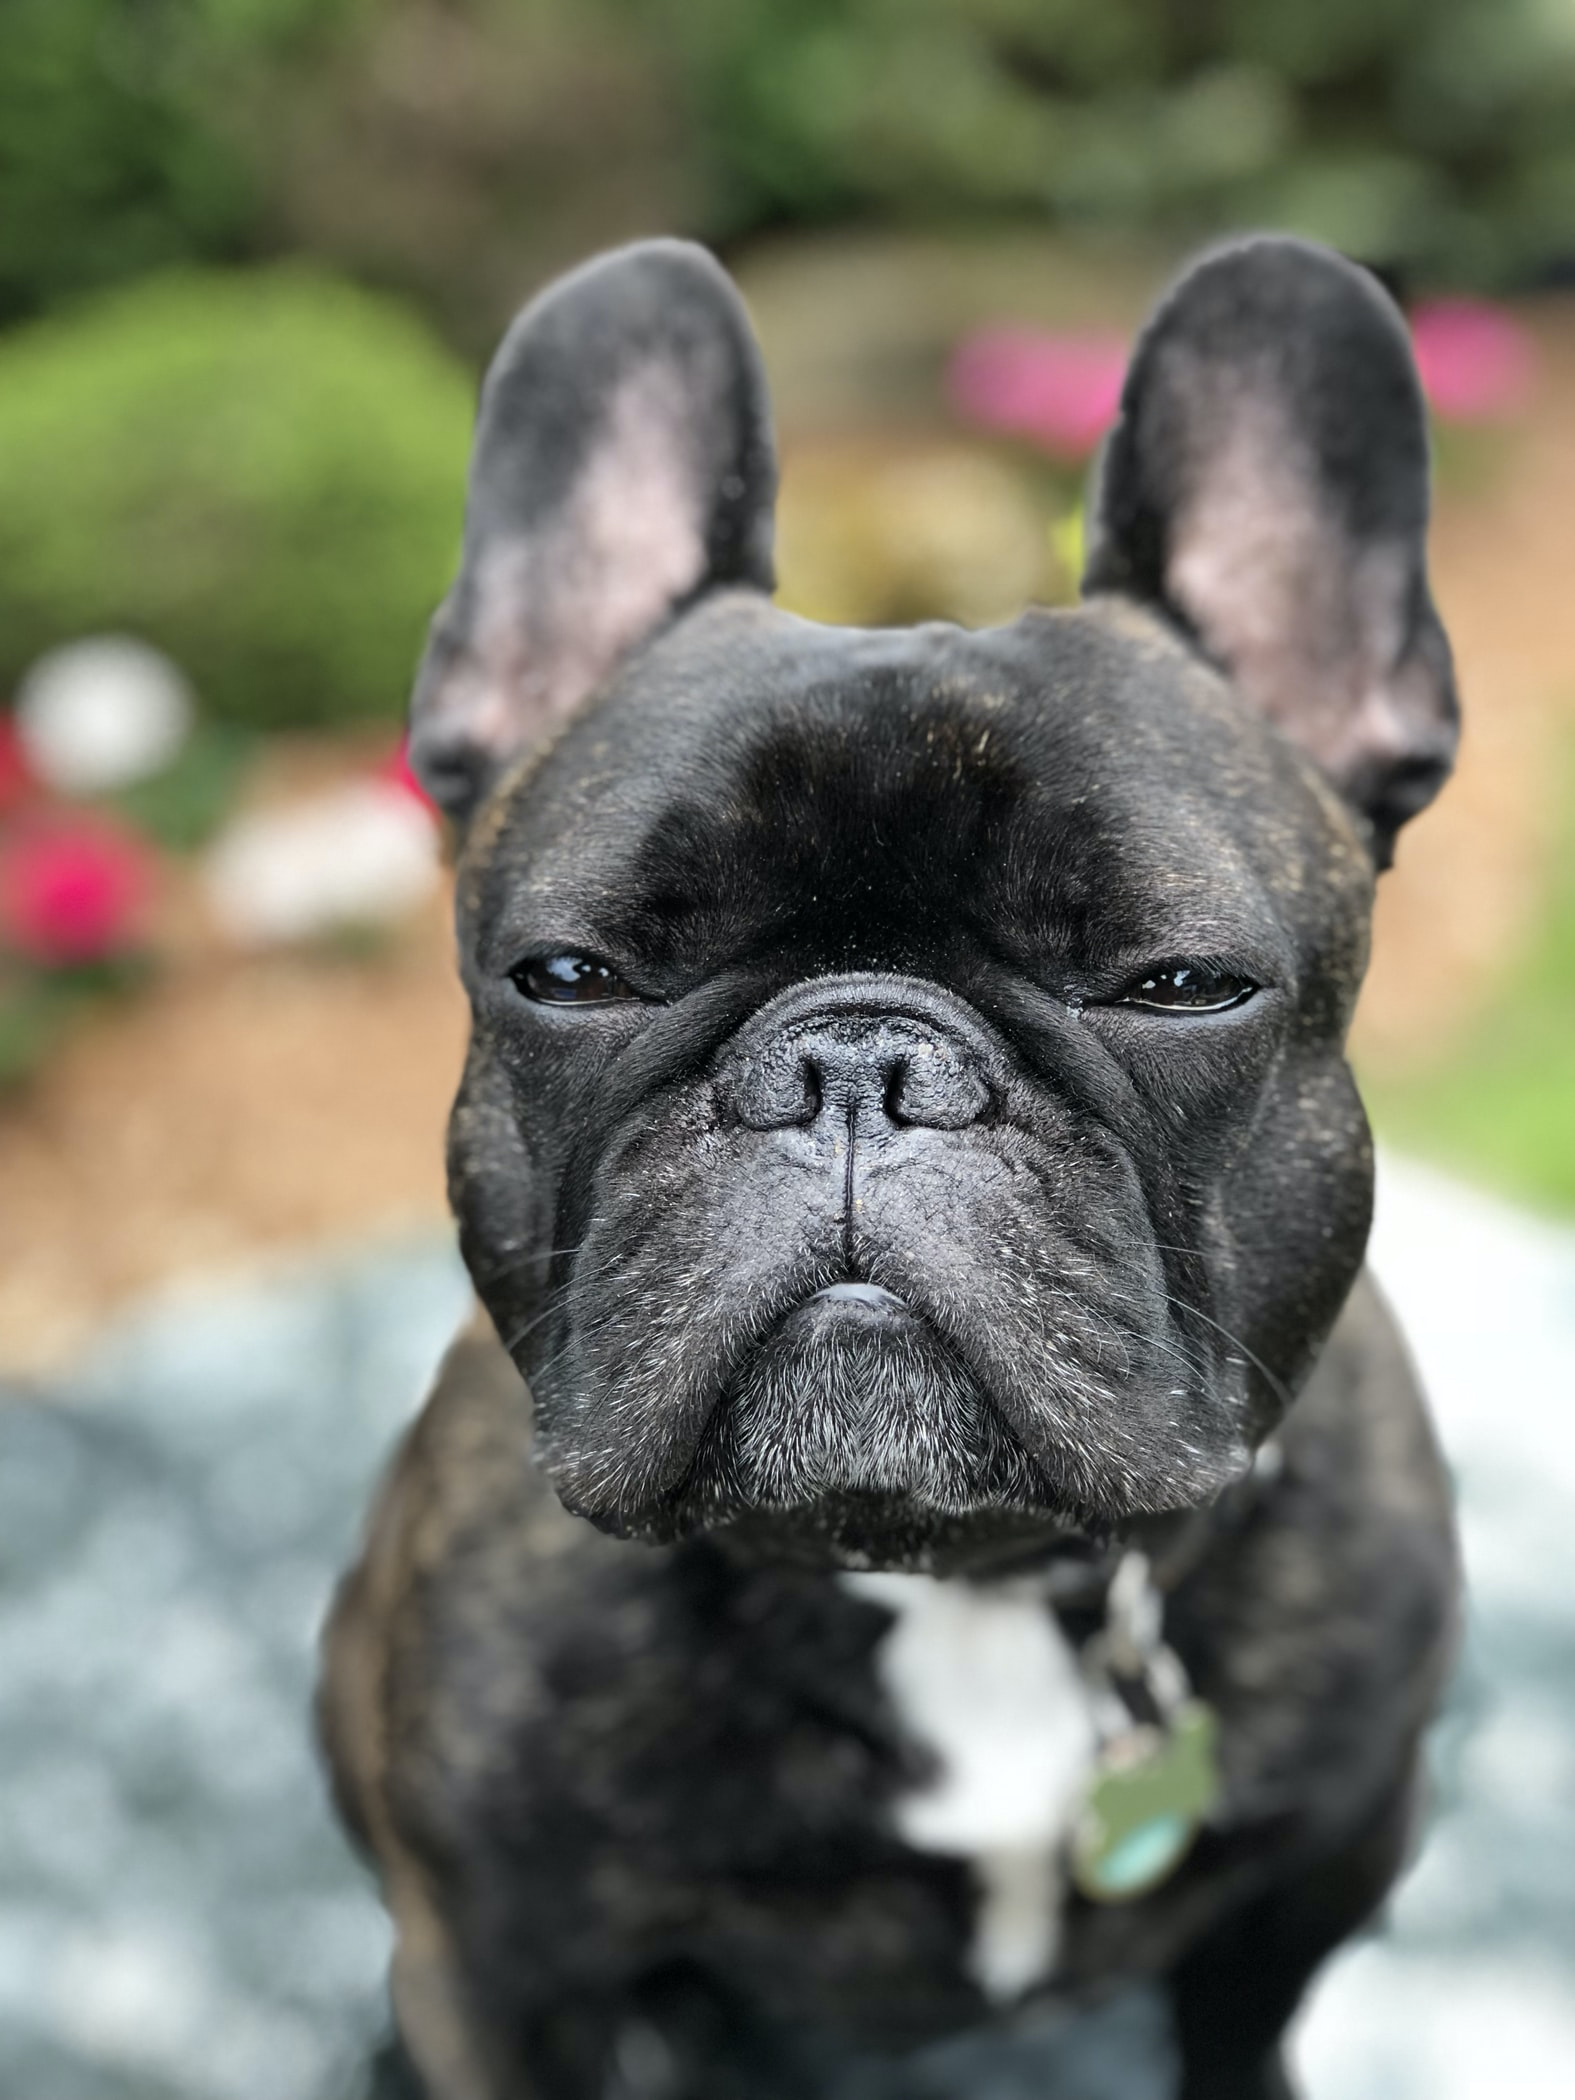 A French Bulldog sitting in the garden with its sleepy face